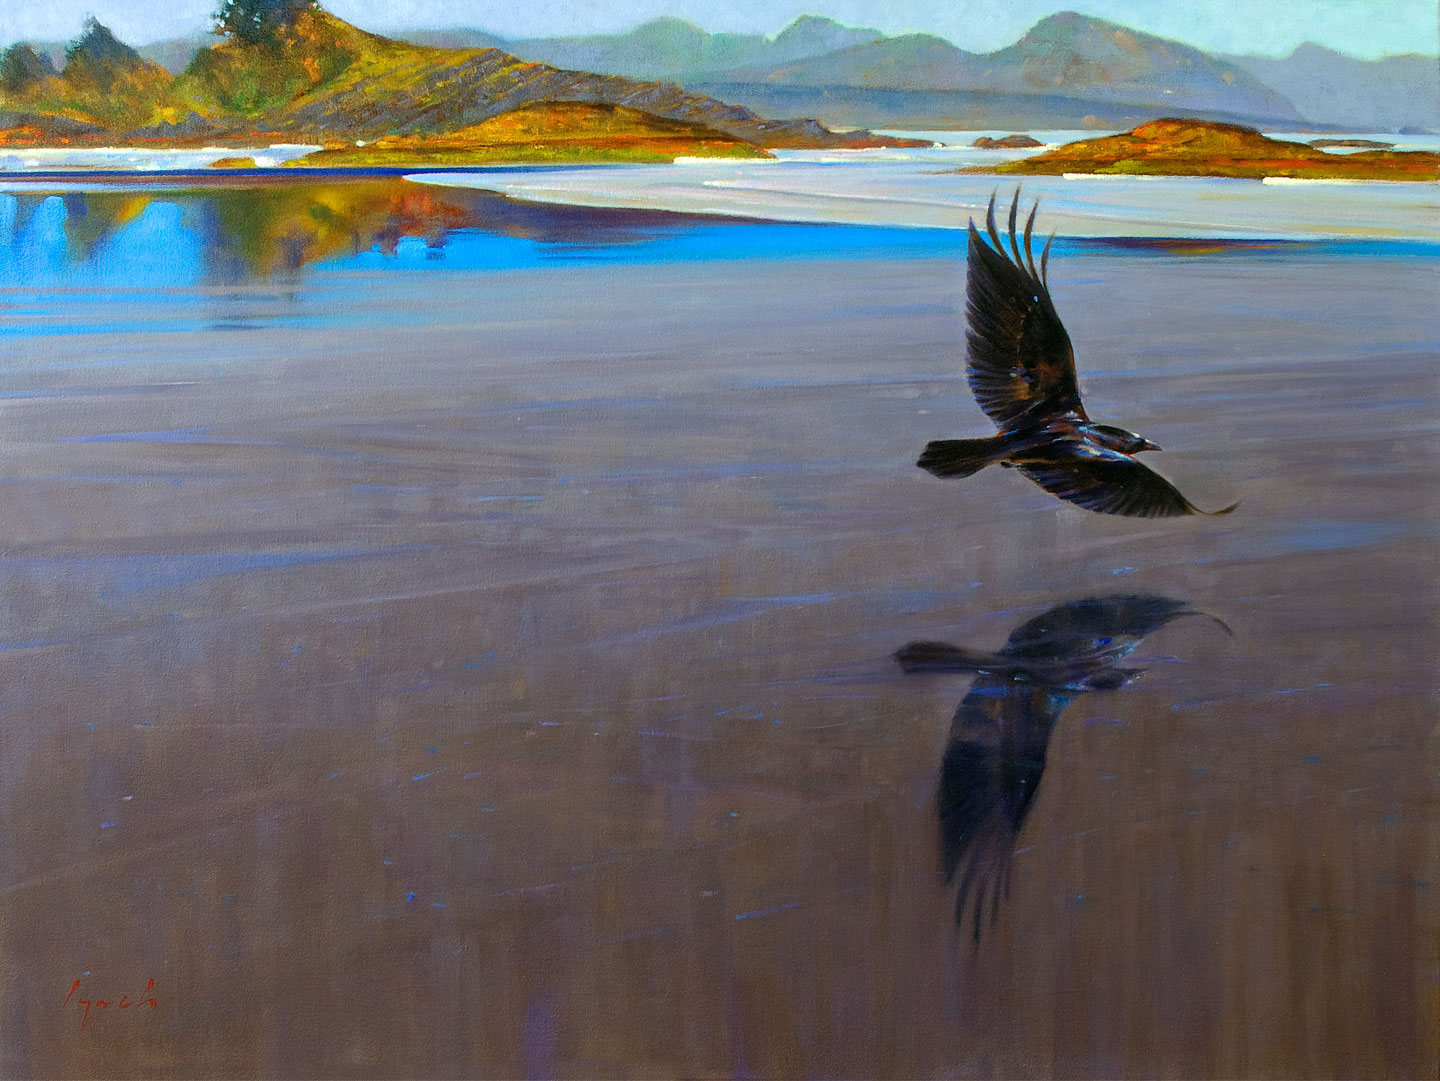 'Raven on Glass' 36 X 48 in. oil on canvas - Avenue Gallery, Oak Bay. copyright Brent Lynch 
#lynch #brentlynch #art #artwork #lynchatlarge #artrist #life #lifedrawing #painting #watercolor #gallery #fineart #creative #contemporaryart #landscape #figurative #pleinair #workshops #canada #britishcolumbia #design #unigue #cabo #composition #life #architecture #mexico #rocks #ocean #surf #nature #mountain #alpine.